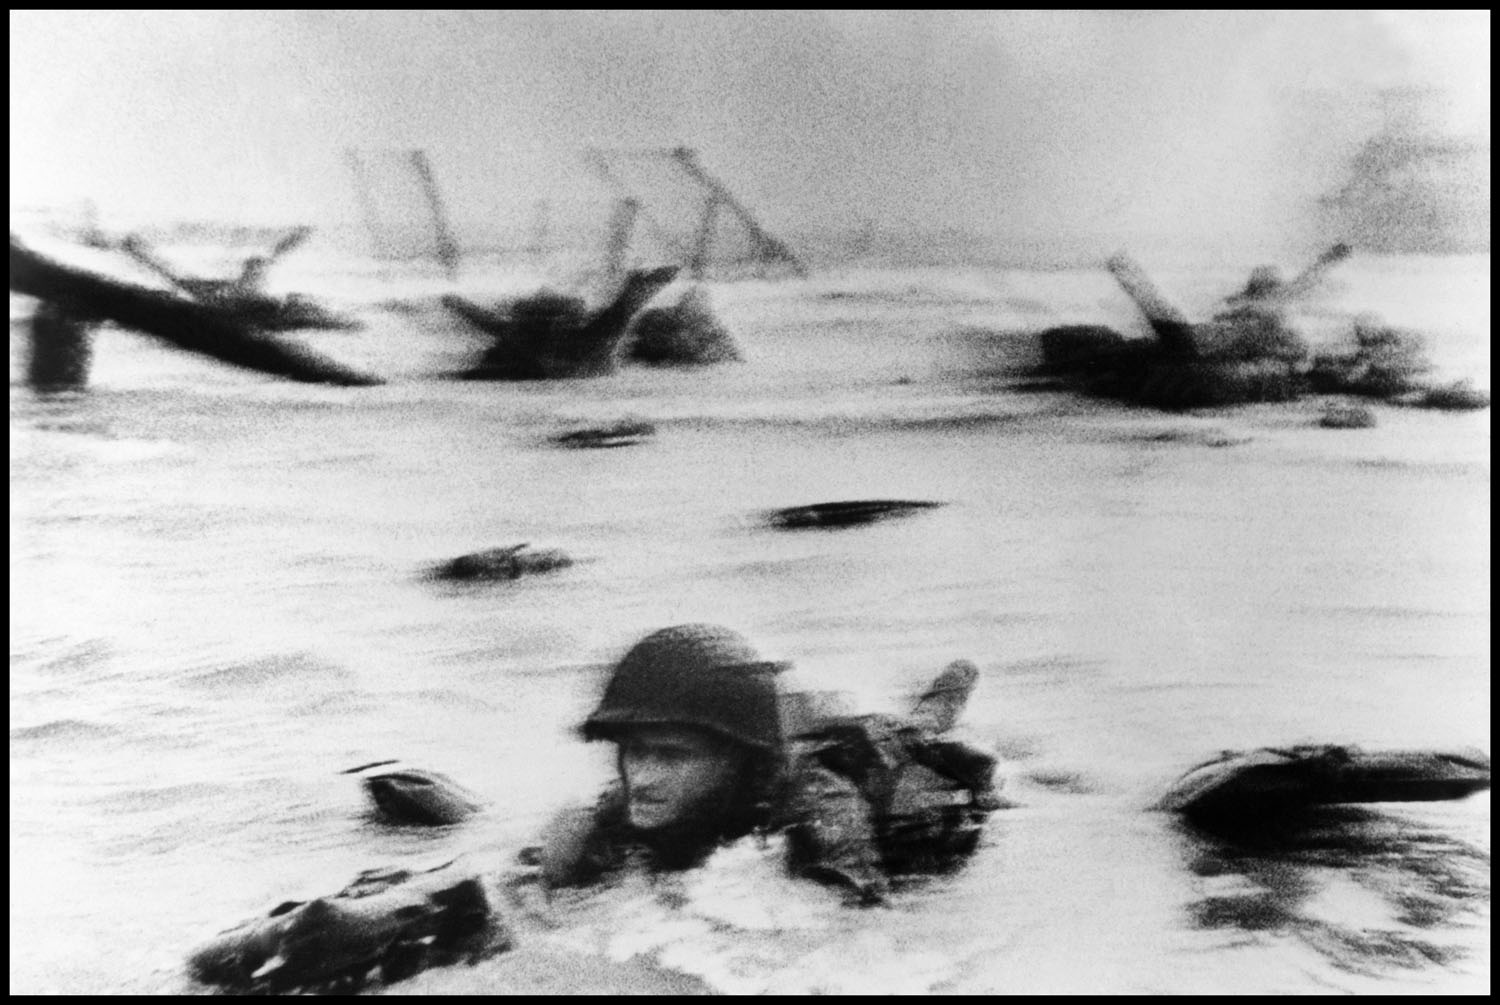 U.S. troops assault Omaha Beach during the D-Day landing, June 6, 1944, Normandy, France.